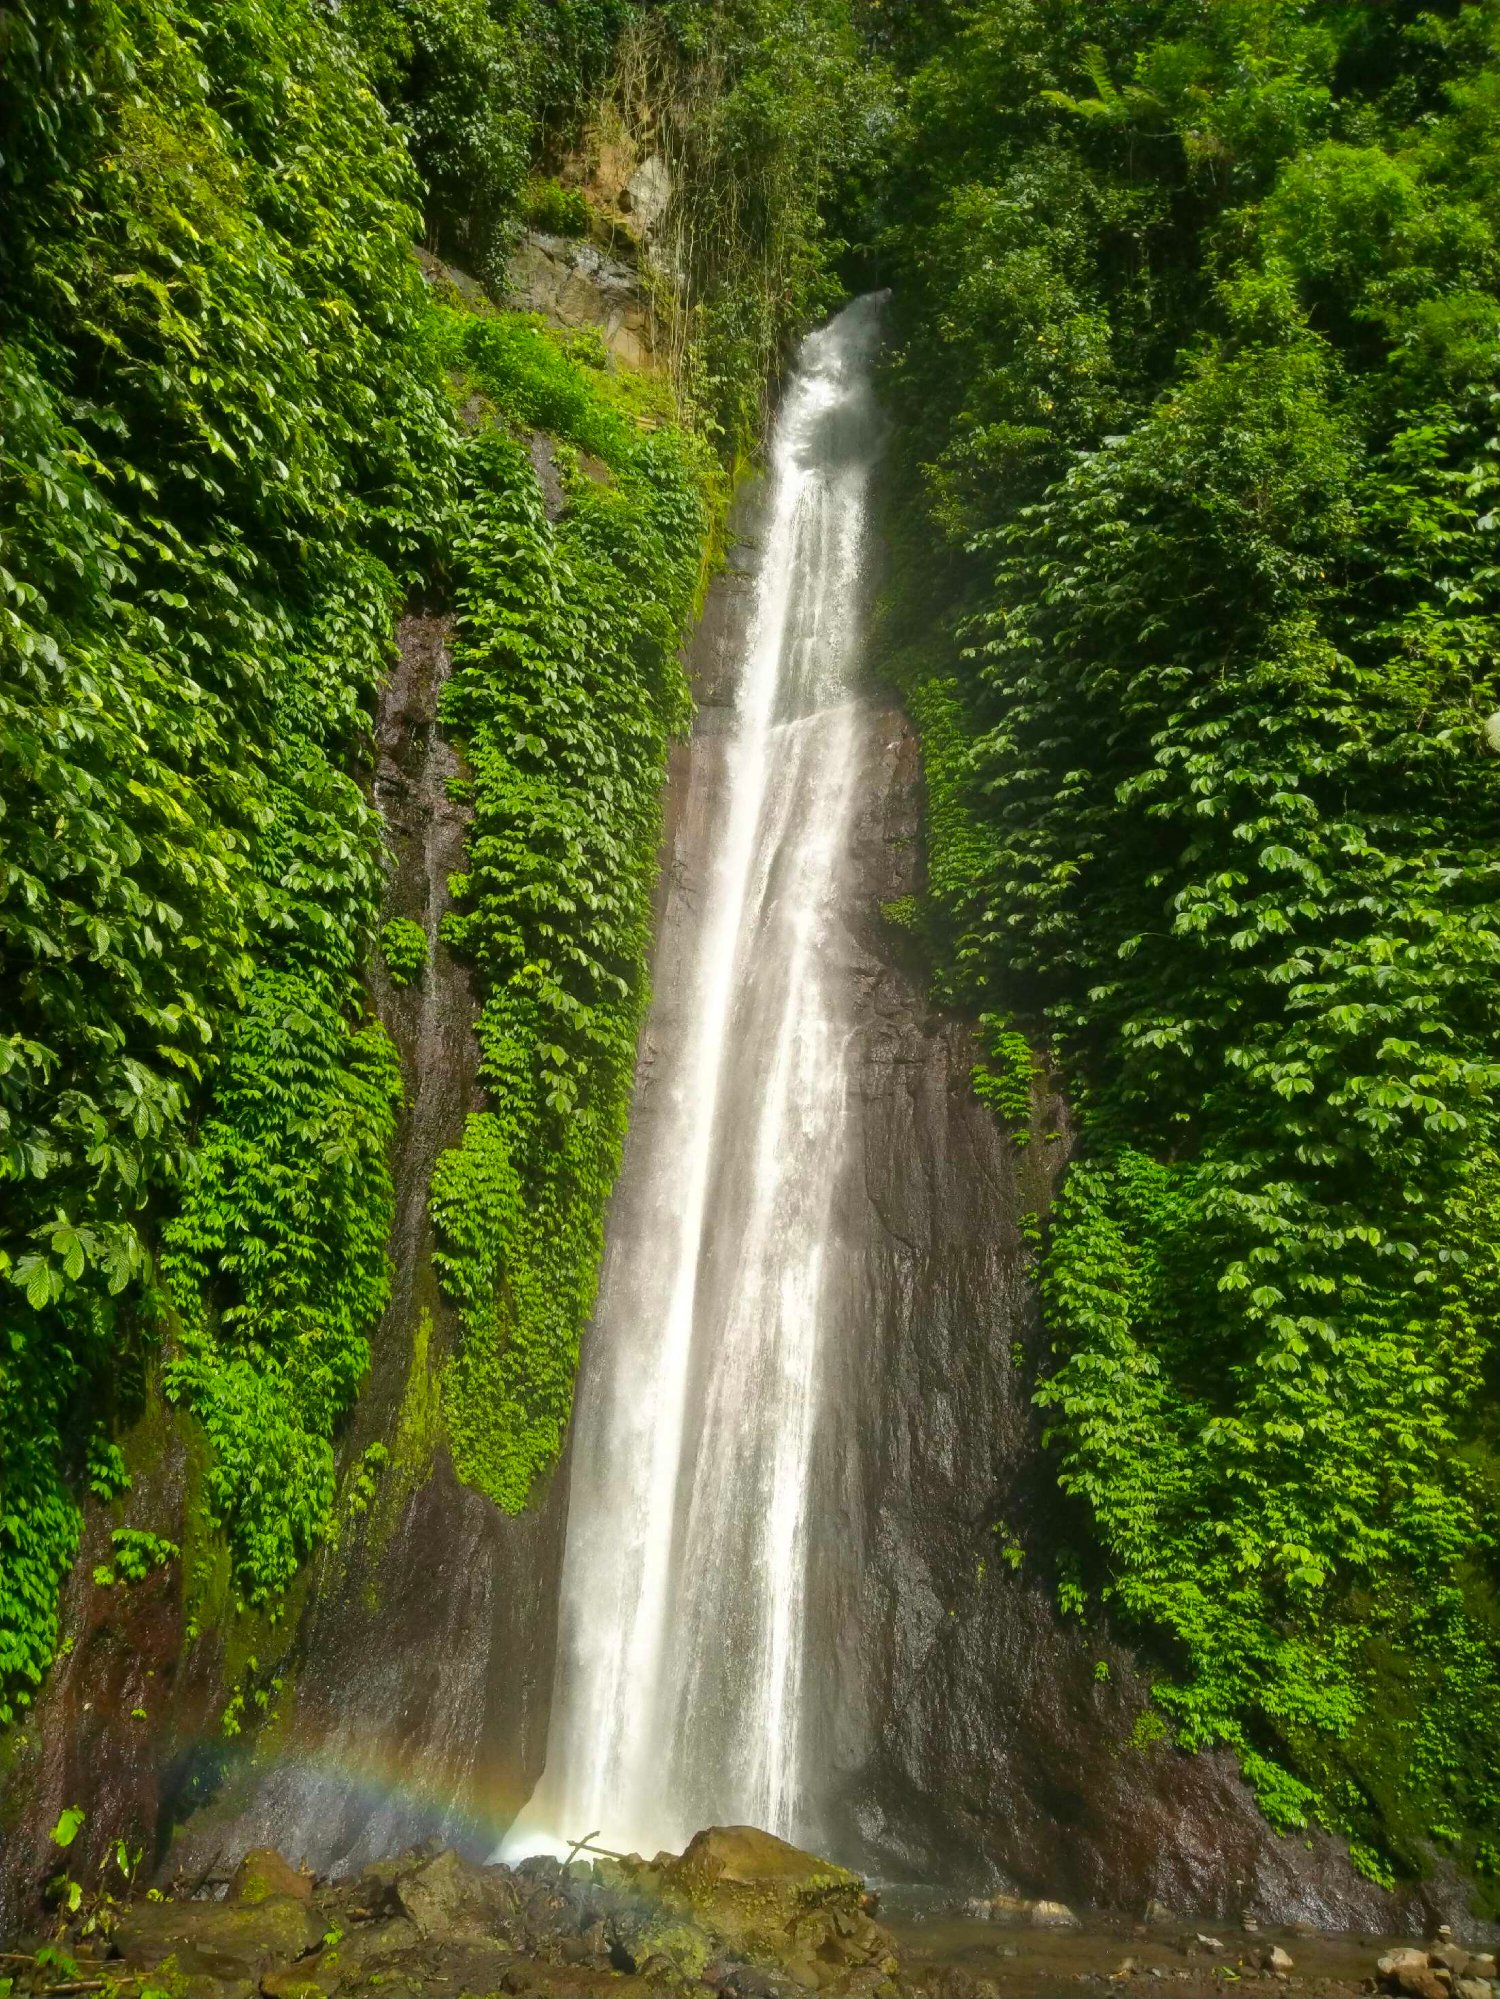 Welcome to Bali's Hidden Paradise: Exploring the Beauty of Munduk Waterfall.